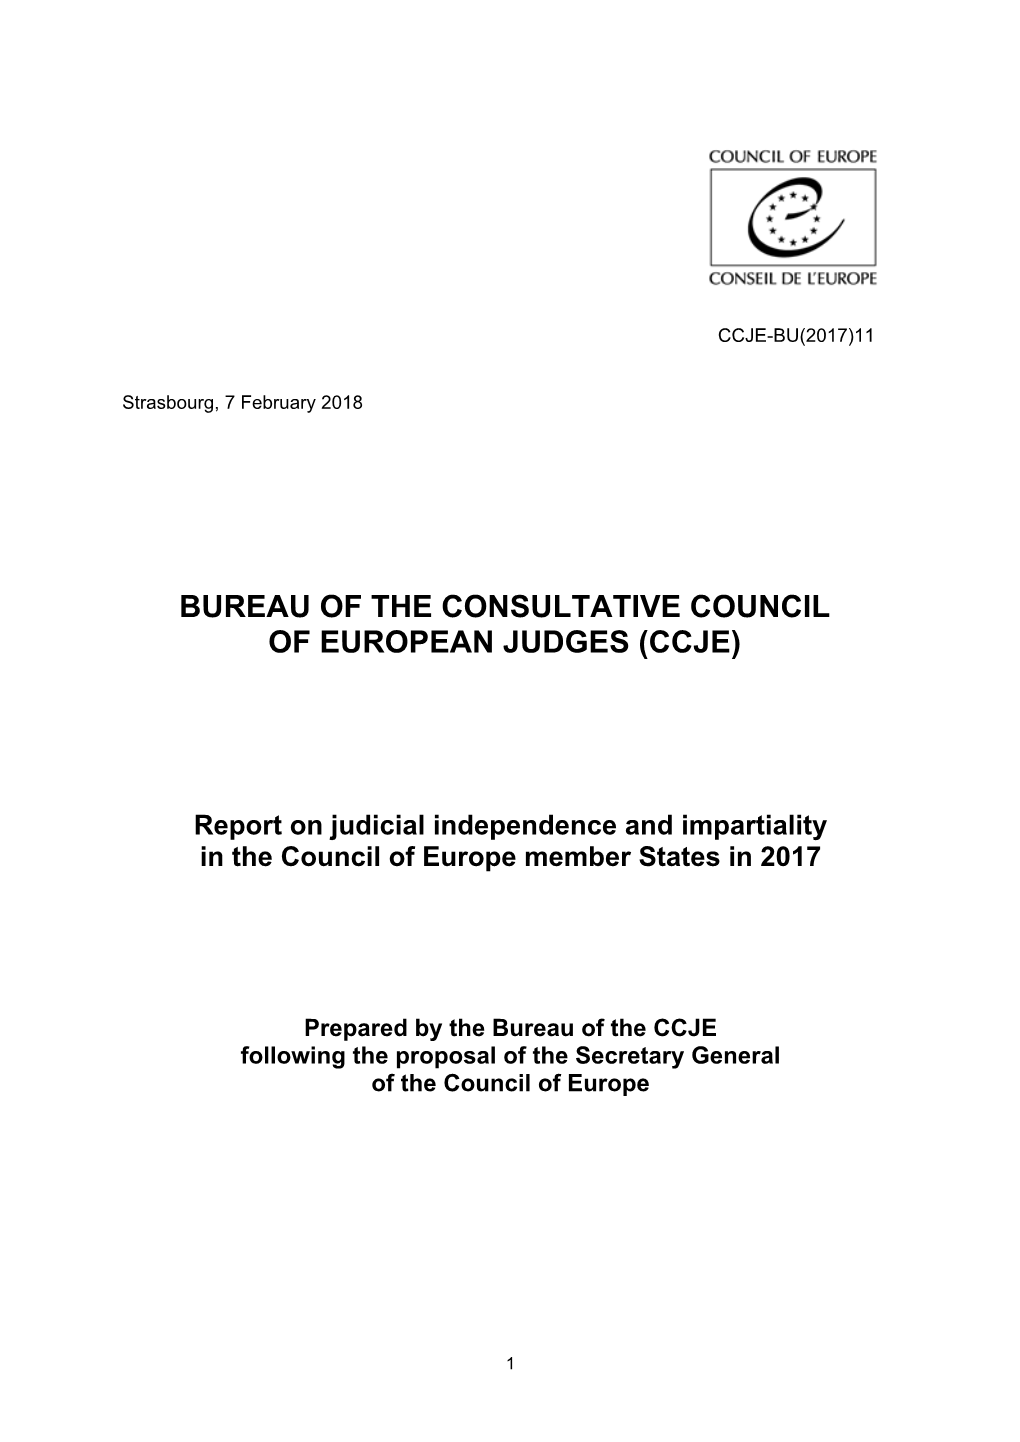 Report on Judicial Independence and Impartiality of in the Council Of